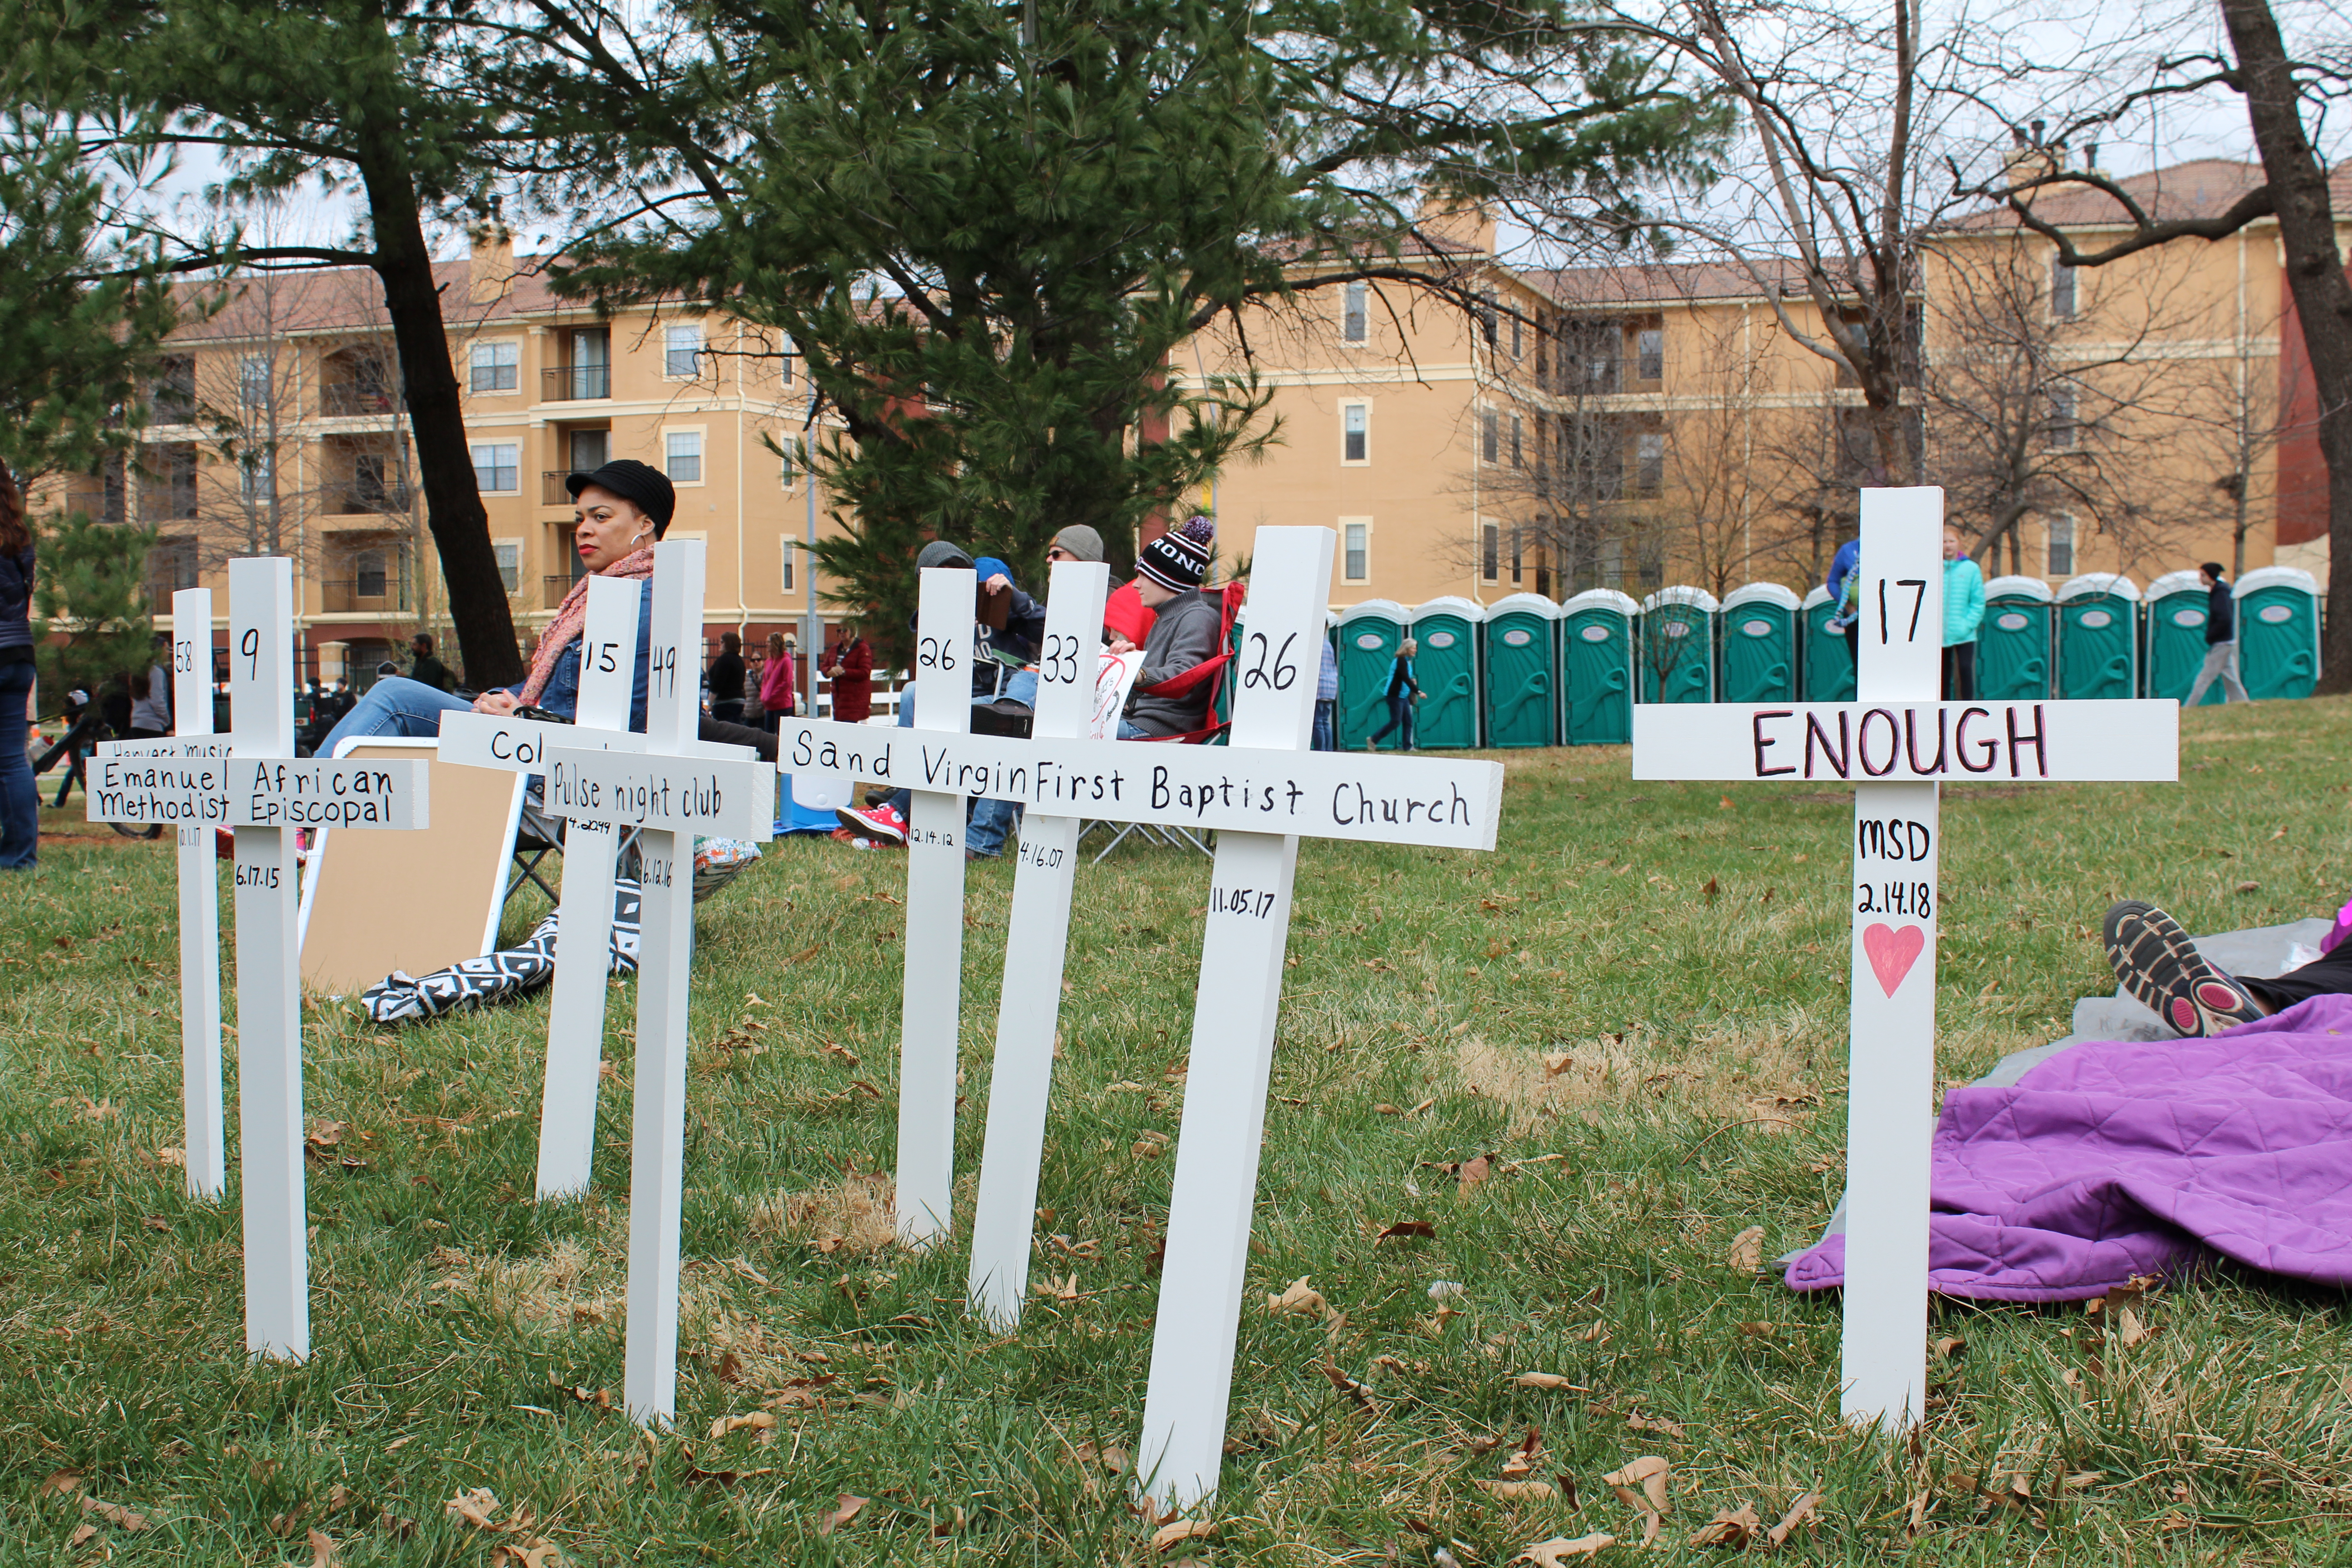 White crosses stick out on the outskirts of the protest in Kansas City, Missouri. Each one symbolized some of the worst mass shootings that have happened in U.S. history, such as Columbine and Pulse nightclub. The dates of each shooting were written directly beneath each shooting, and many protesters stood to stare at the crosses in silence. Photo: Carina Smith, 14 East.